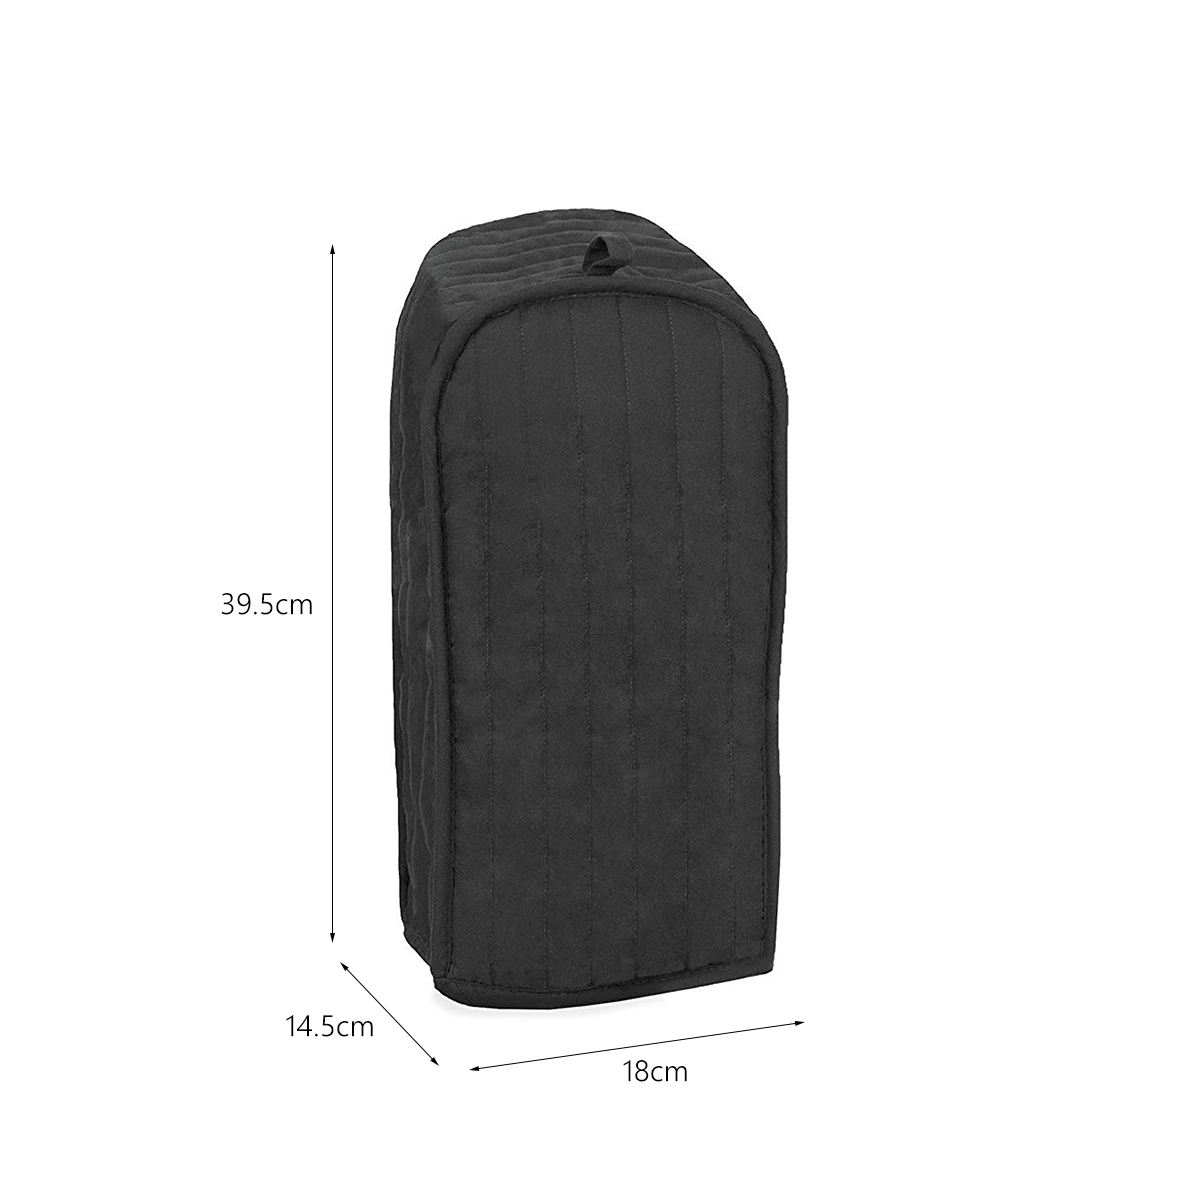 Quilted-Polyester-Kitchen-Blender-Appliance-Cover-Dust-proof-Protection-Case-Bag-1568082-8